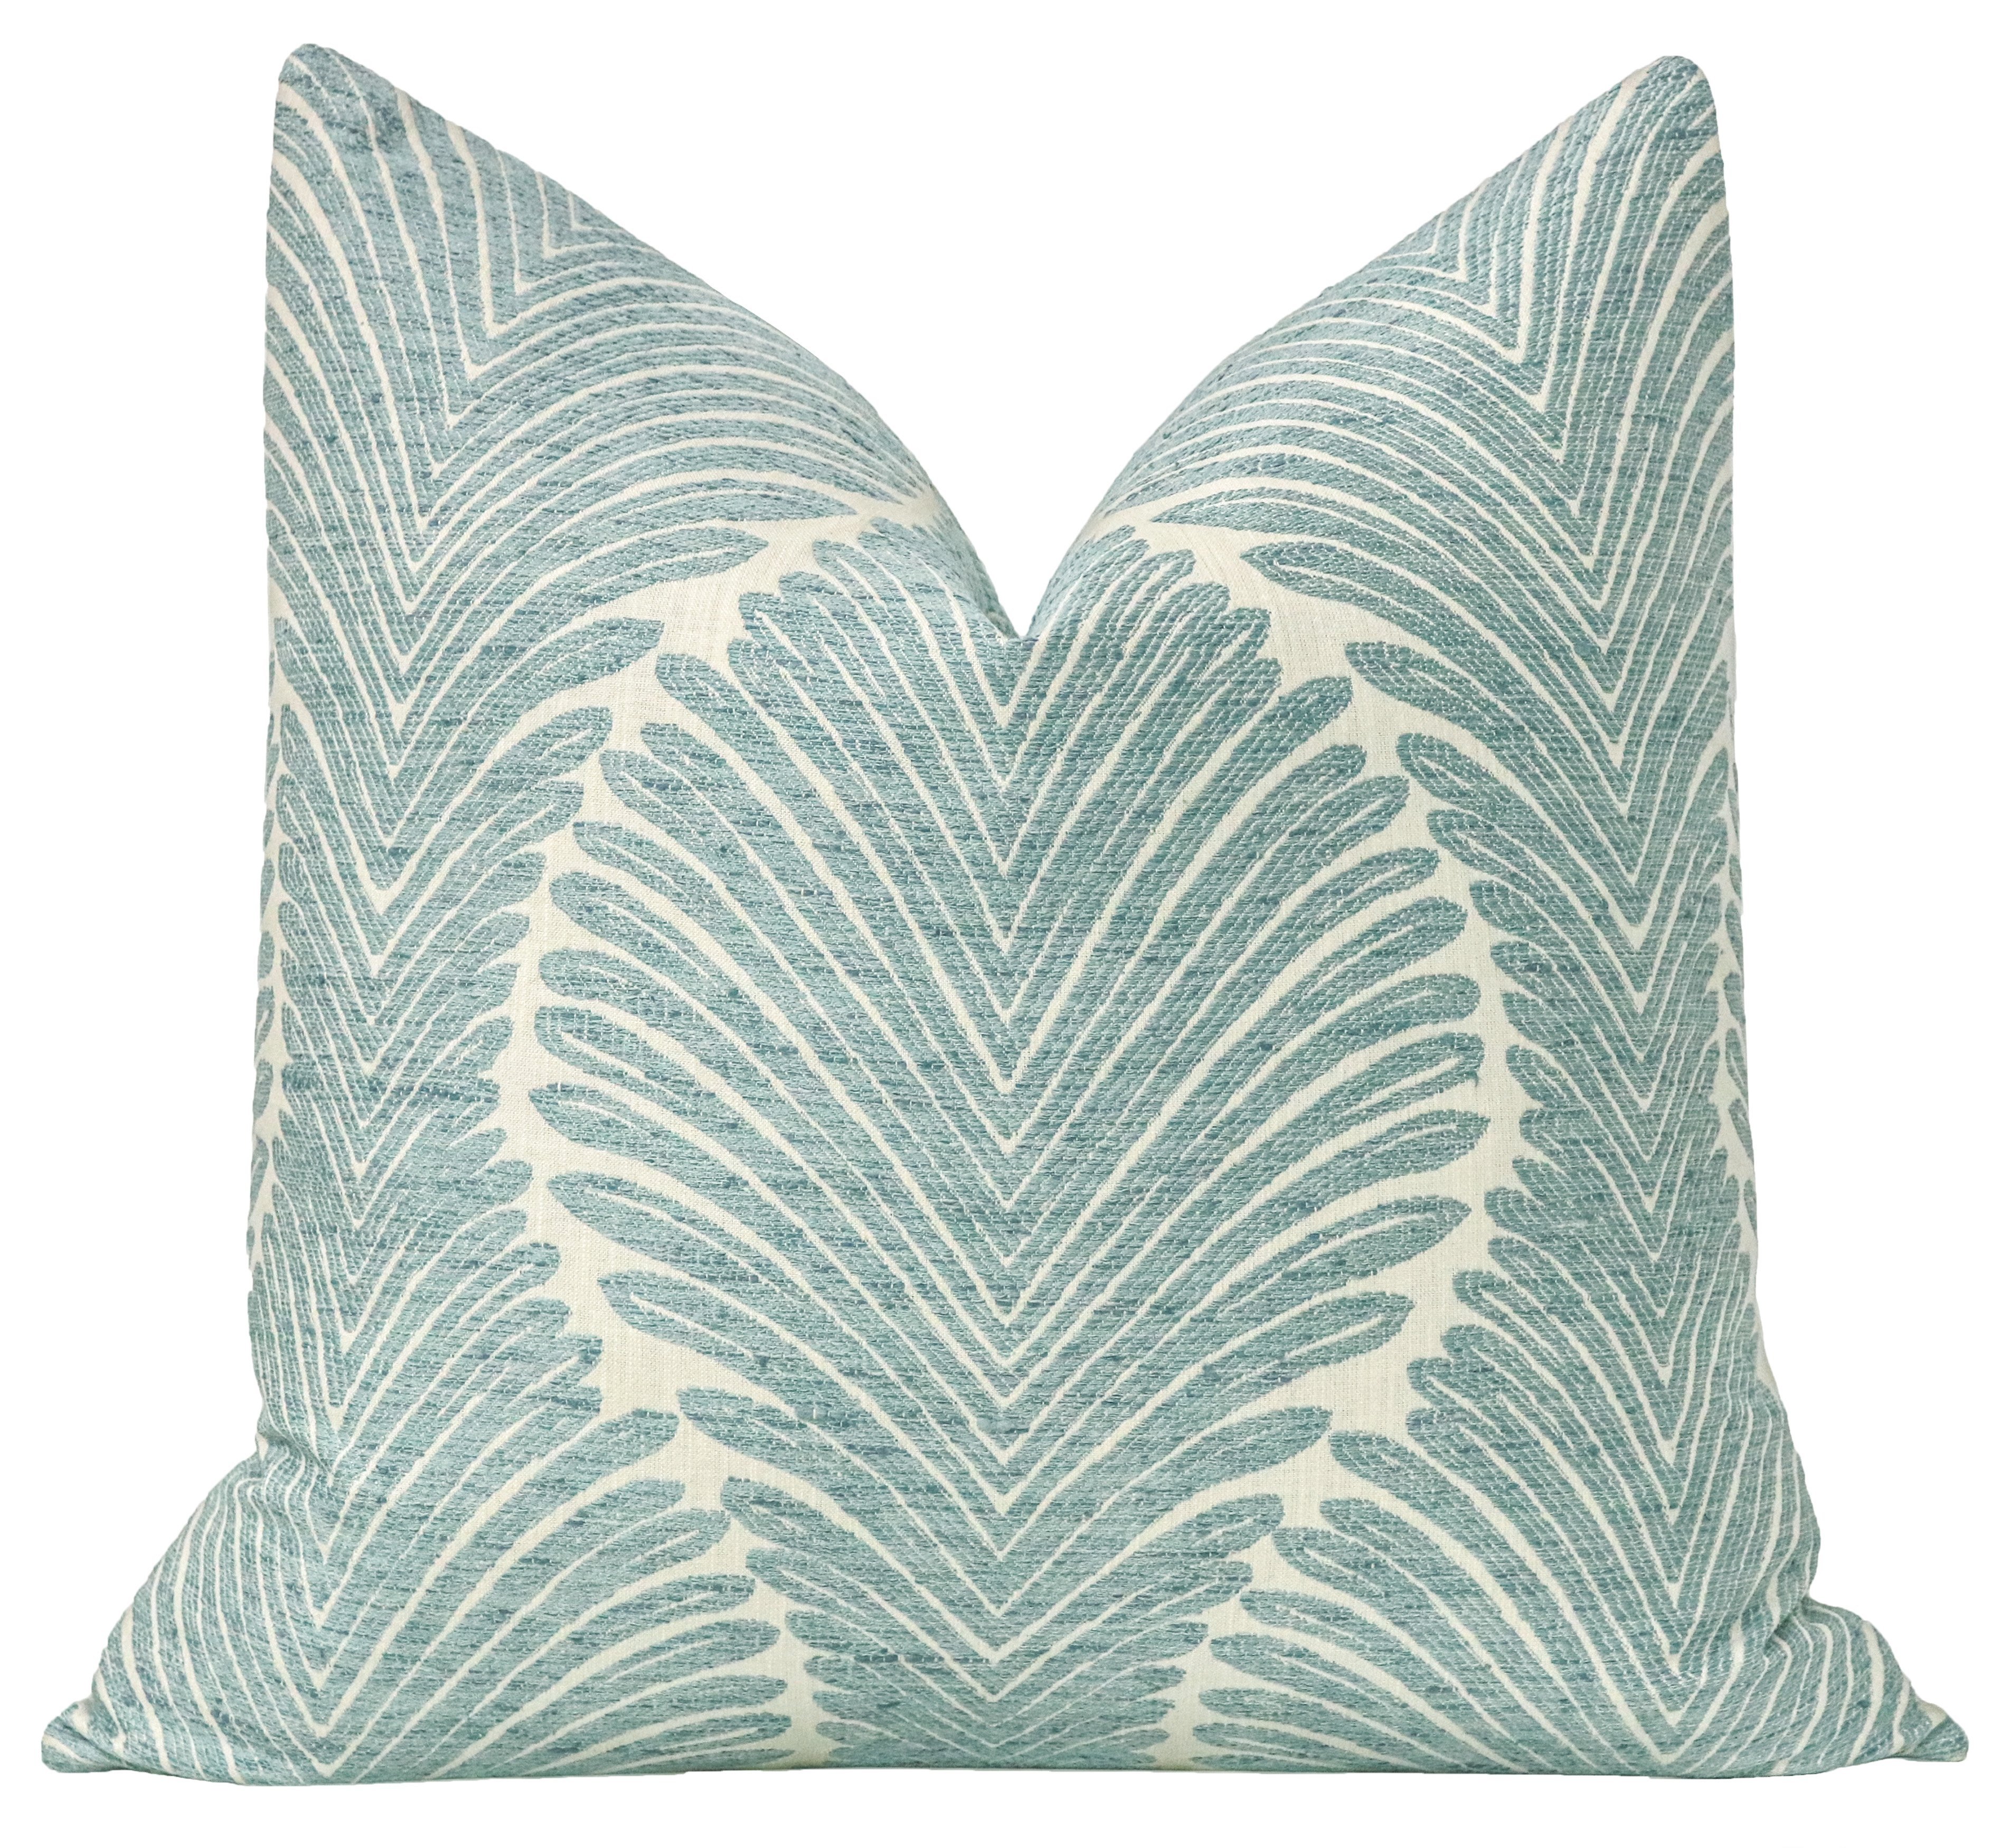 Musgrove Chenille Pillow Cover, Spa Blue, 20" x 20" - Image 0